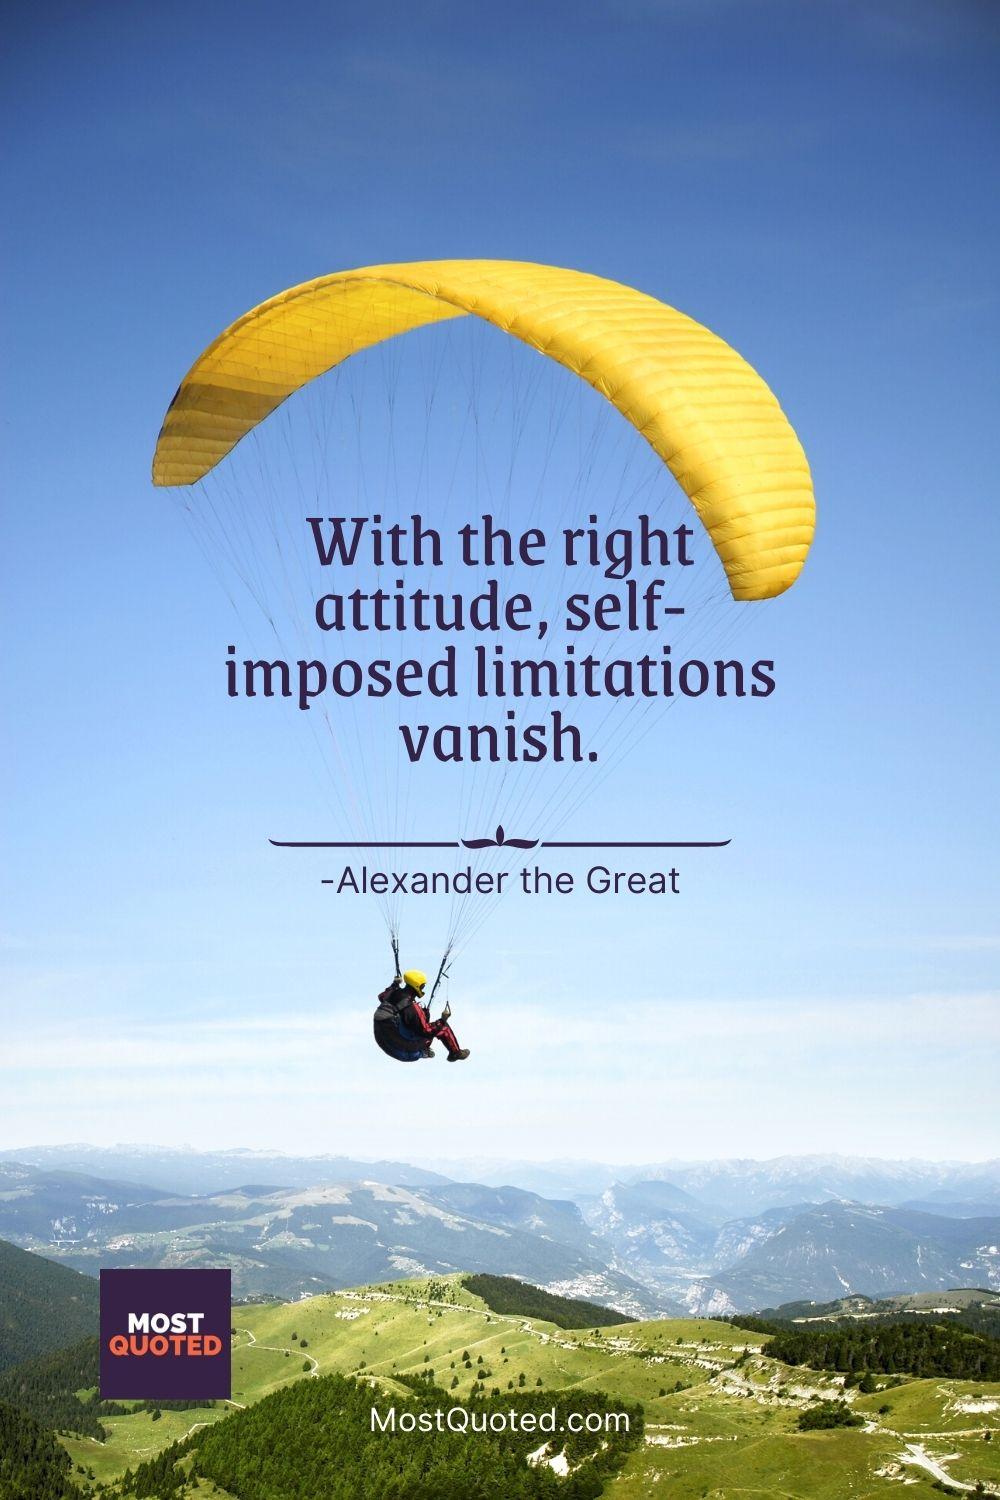 With the right attitude, self-imposed limitations vanish. - Alexander the Great